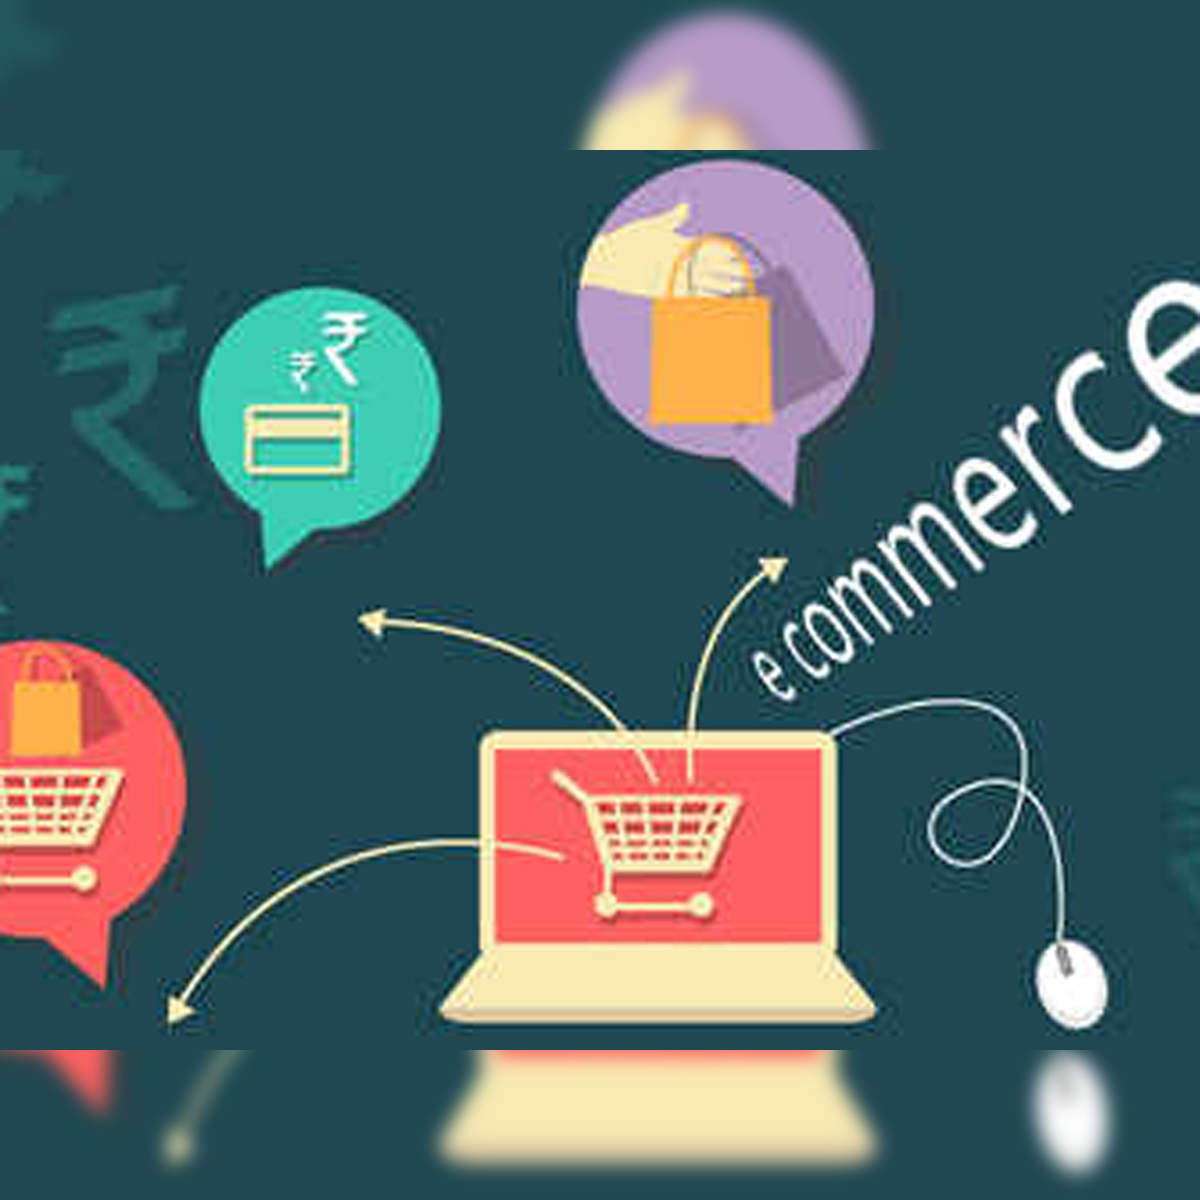 e commerce to be key growth driver for lifestyle brands hindi speaking consumers ignored by luxury brands marketers